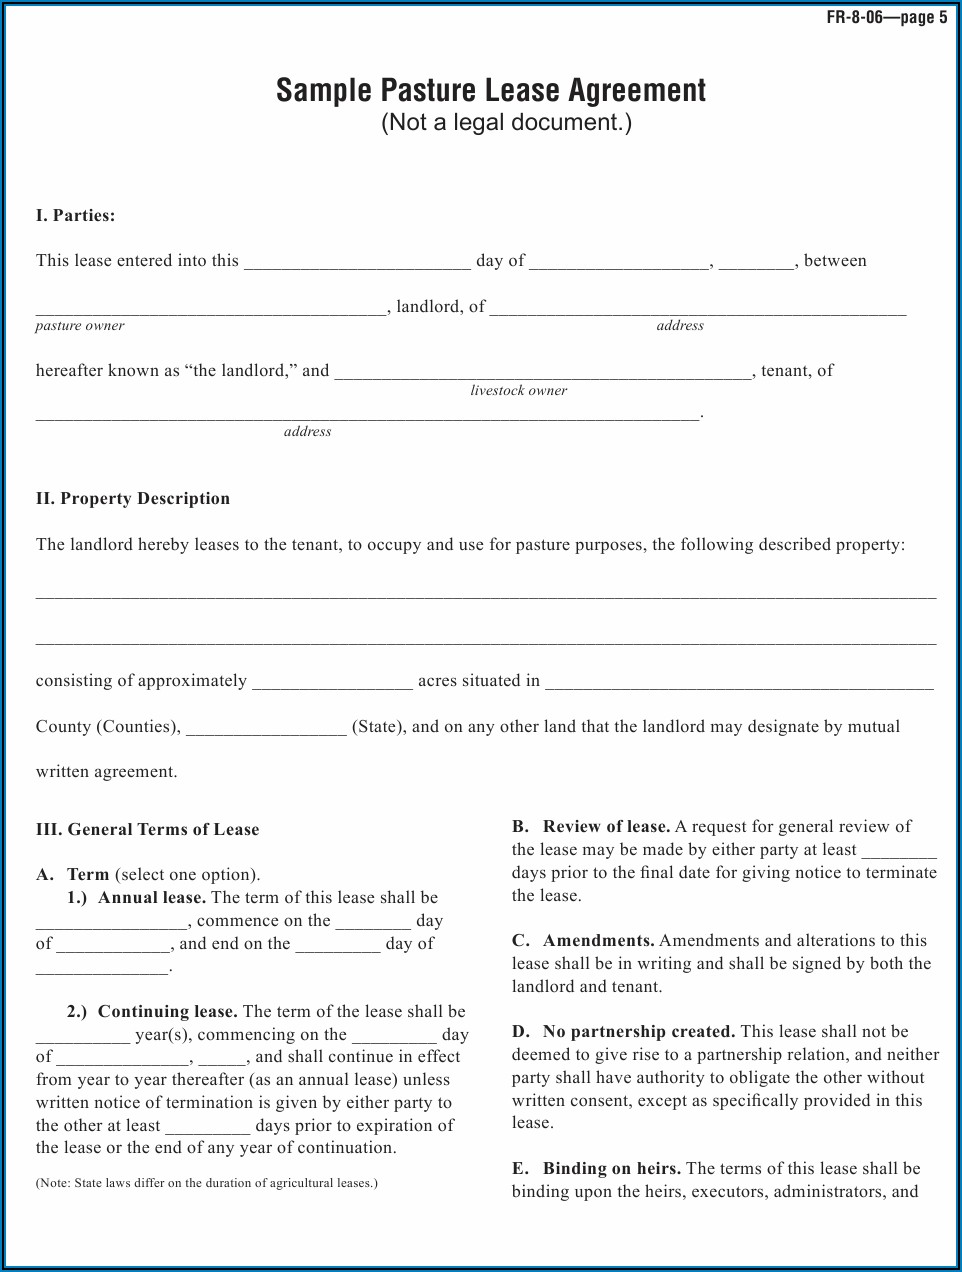 Cattle Grazing Lease Agreement Form